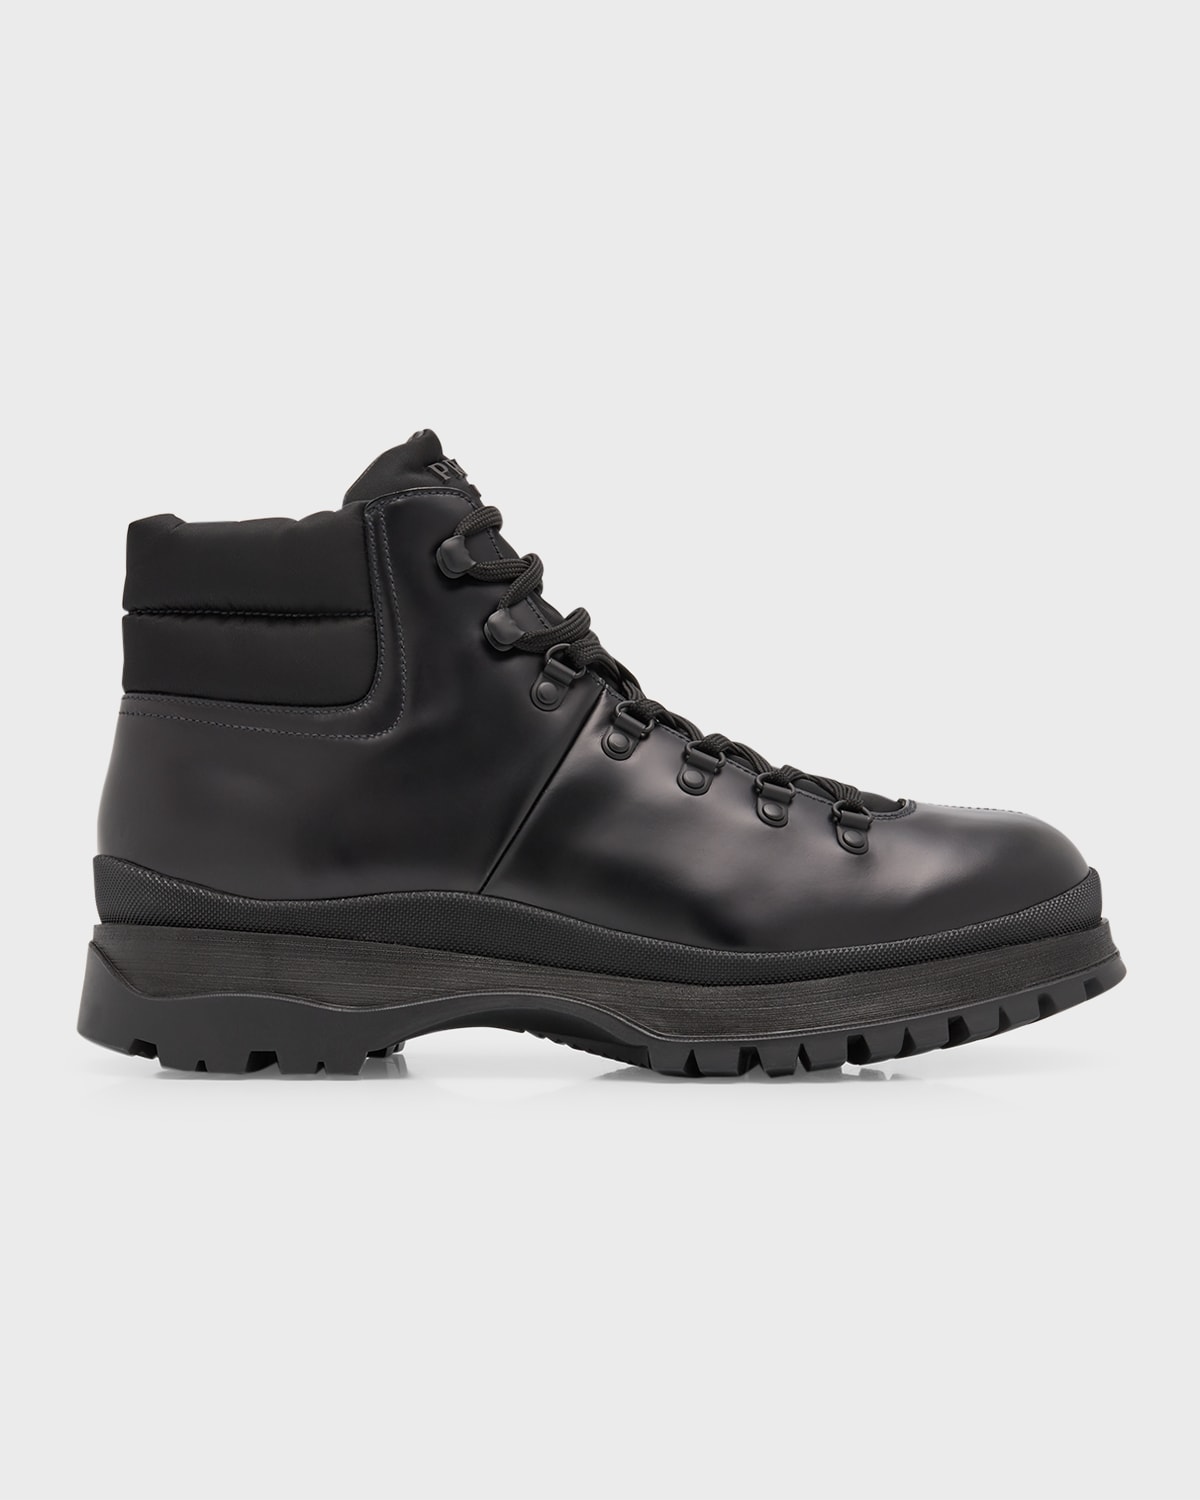 PRADA MEN'S BRUCCIATO LEATHER LACE-UP HIKING BOOTS